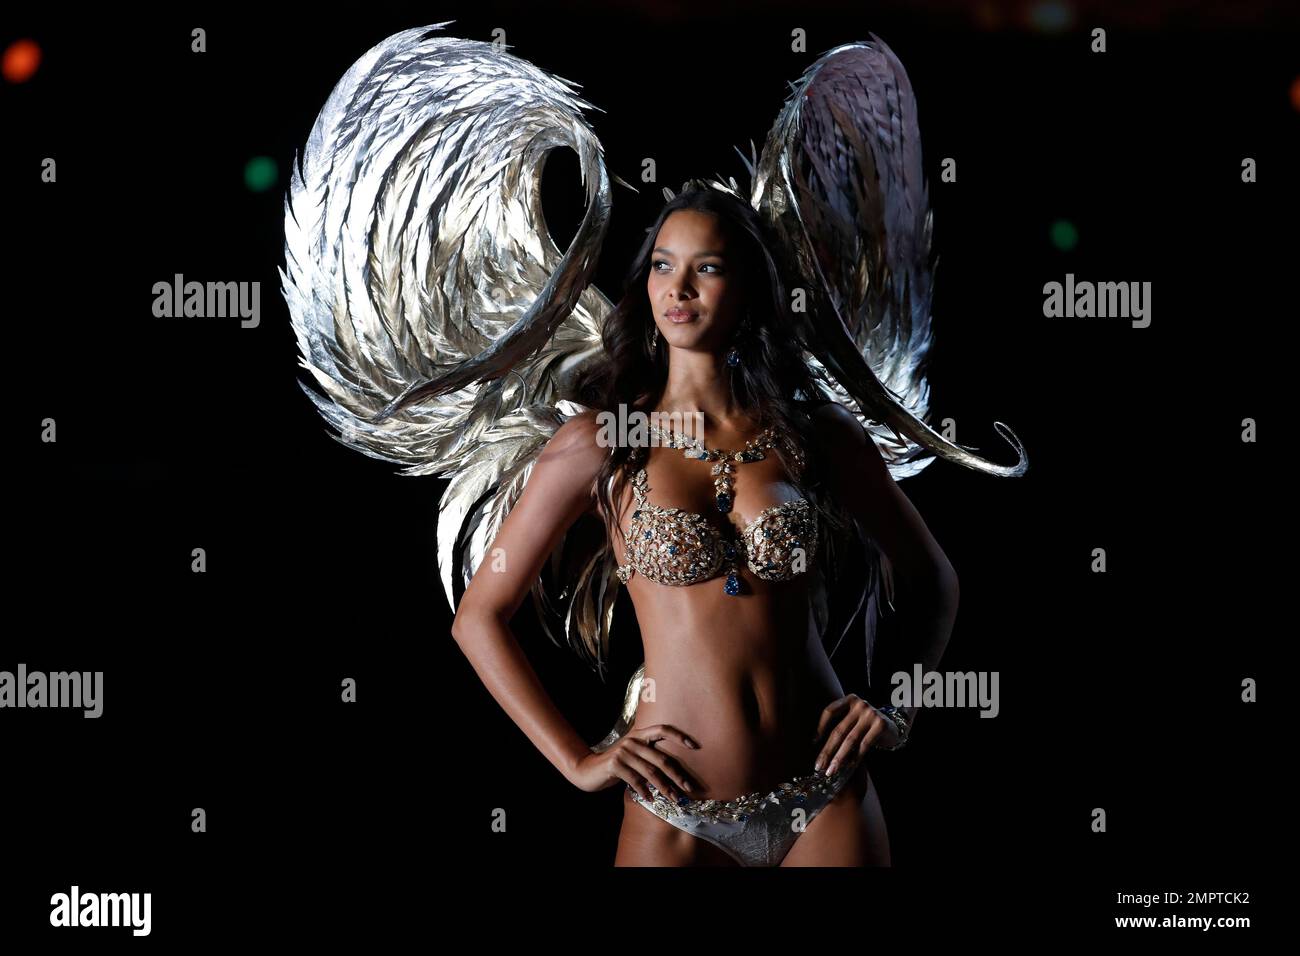 Brazilian model Lais Ribeiro wears the $2 million Champagne Nights Fantasy  Bra by Mouawad on stage, during the Victoria's Secret fashion show at the  Mercedes-Benz Arena in Shanghai, China, Monday, Nov. 20